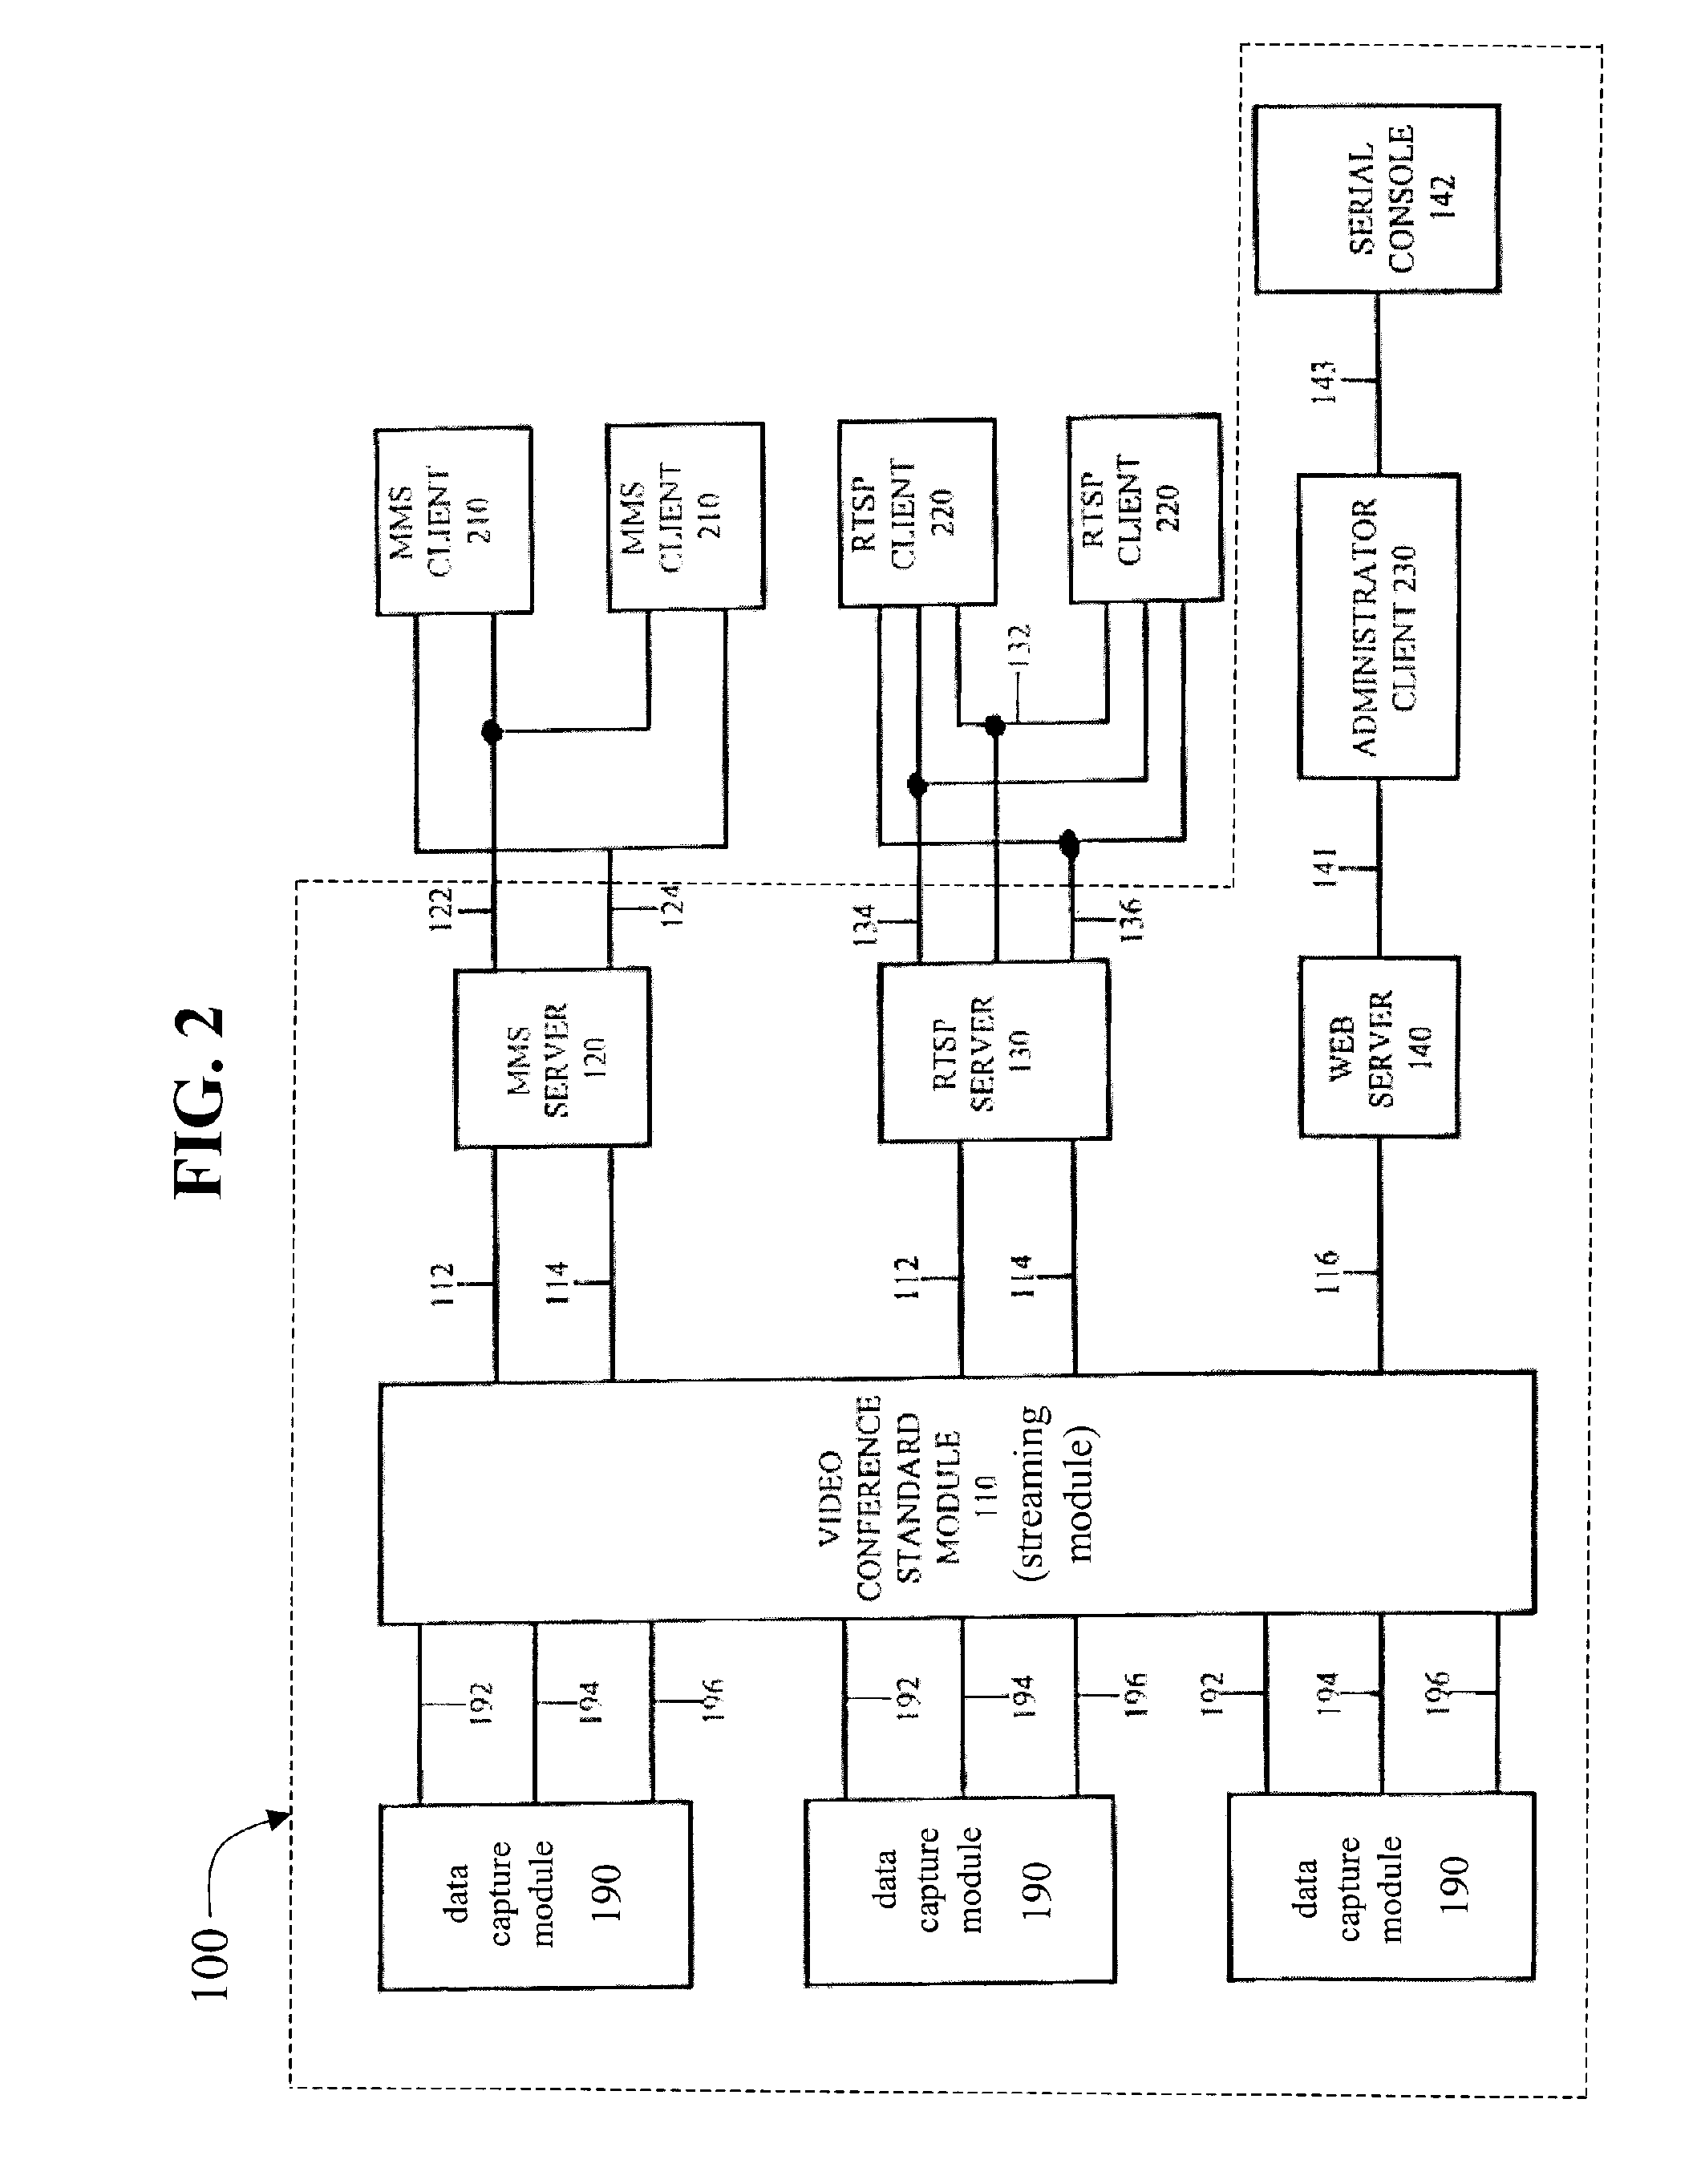 Systems and methods for connecting video conferencing to a distributed network